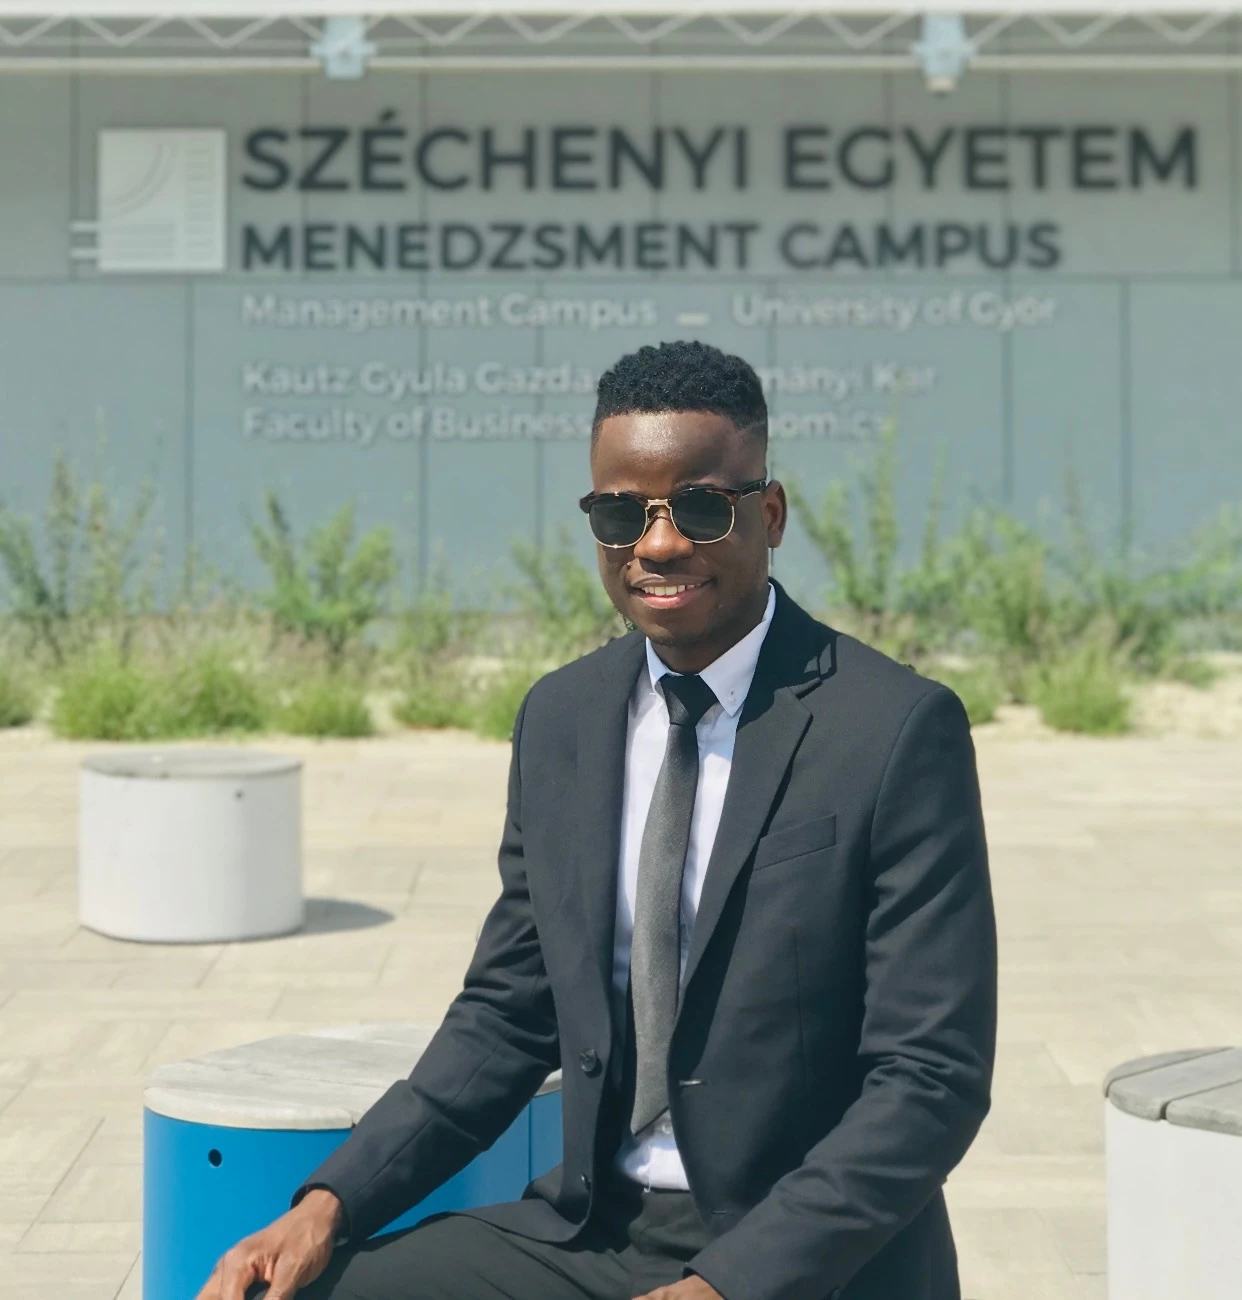 The Angolan alumnus of Széchenyi University is envisioning his future as a diplomat